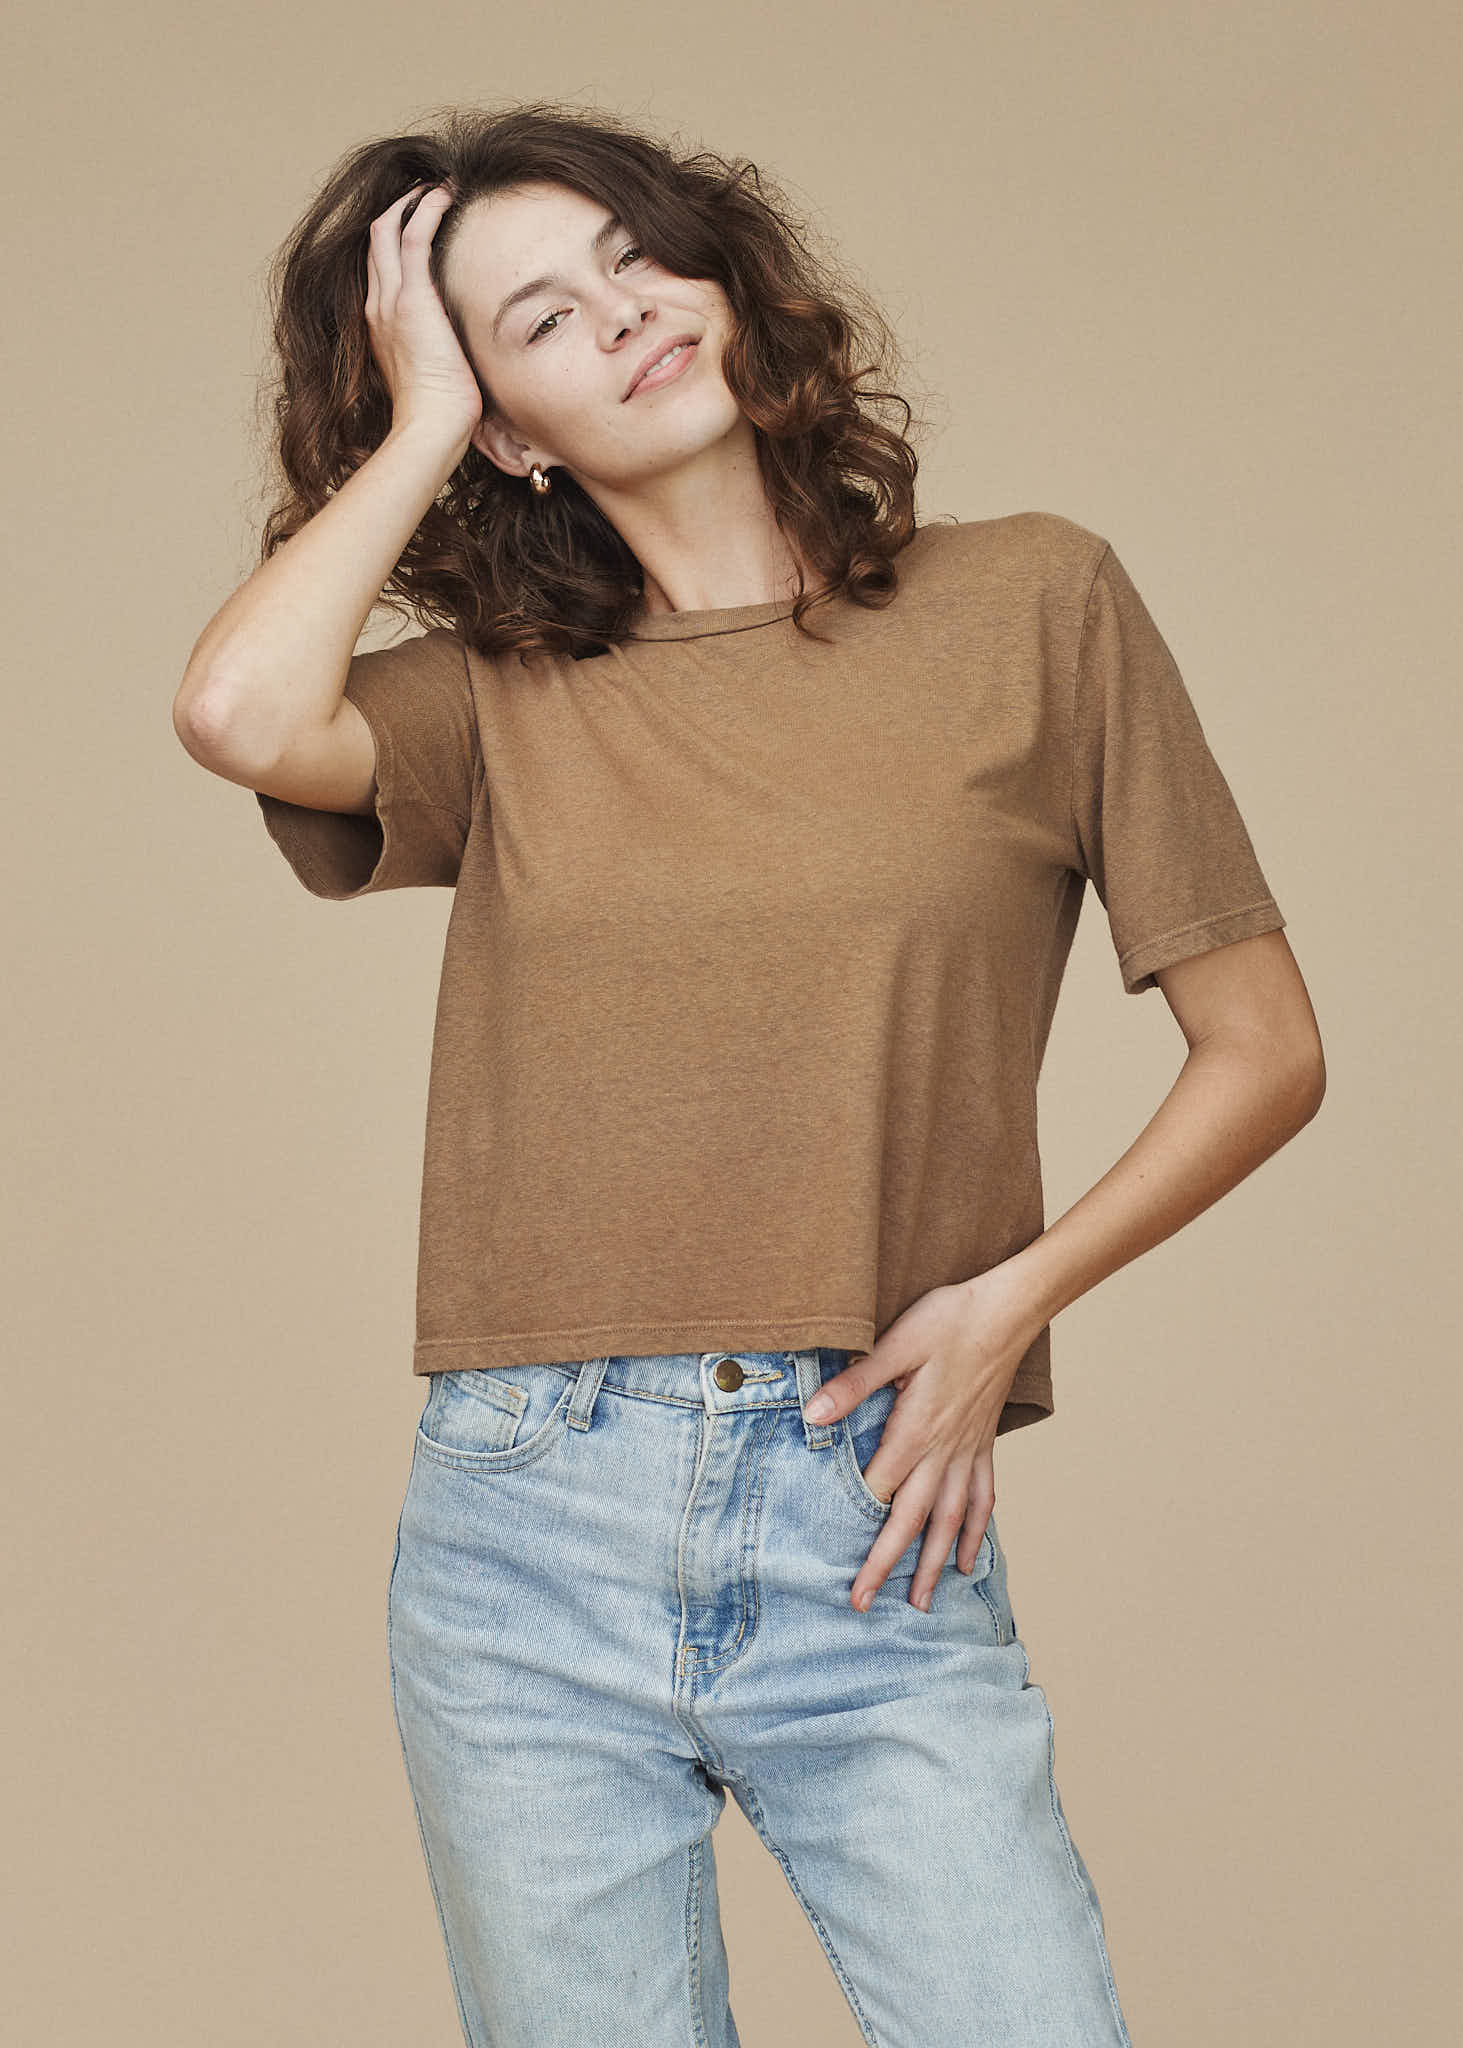 Women's Cropped T-Shirts & Tees